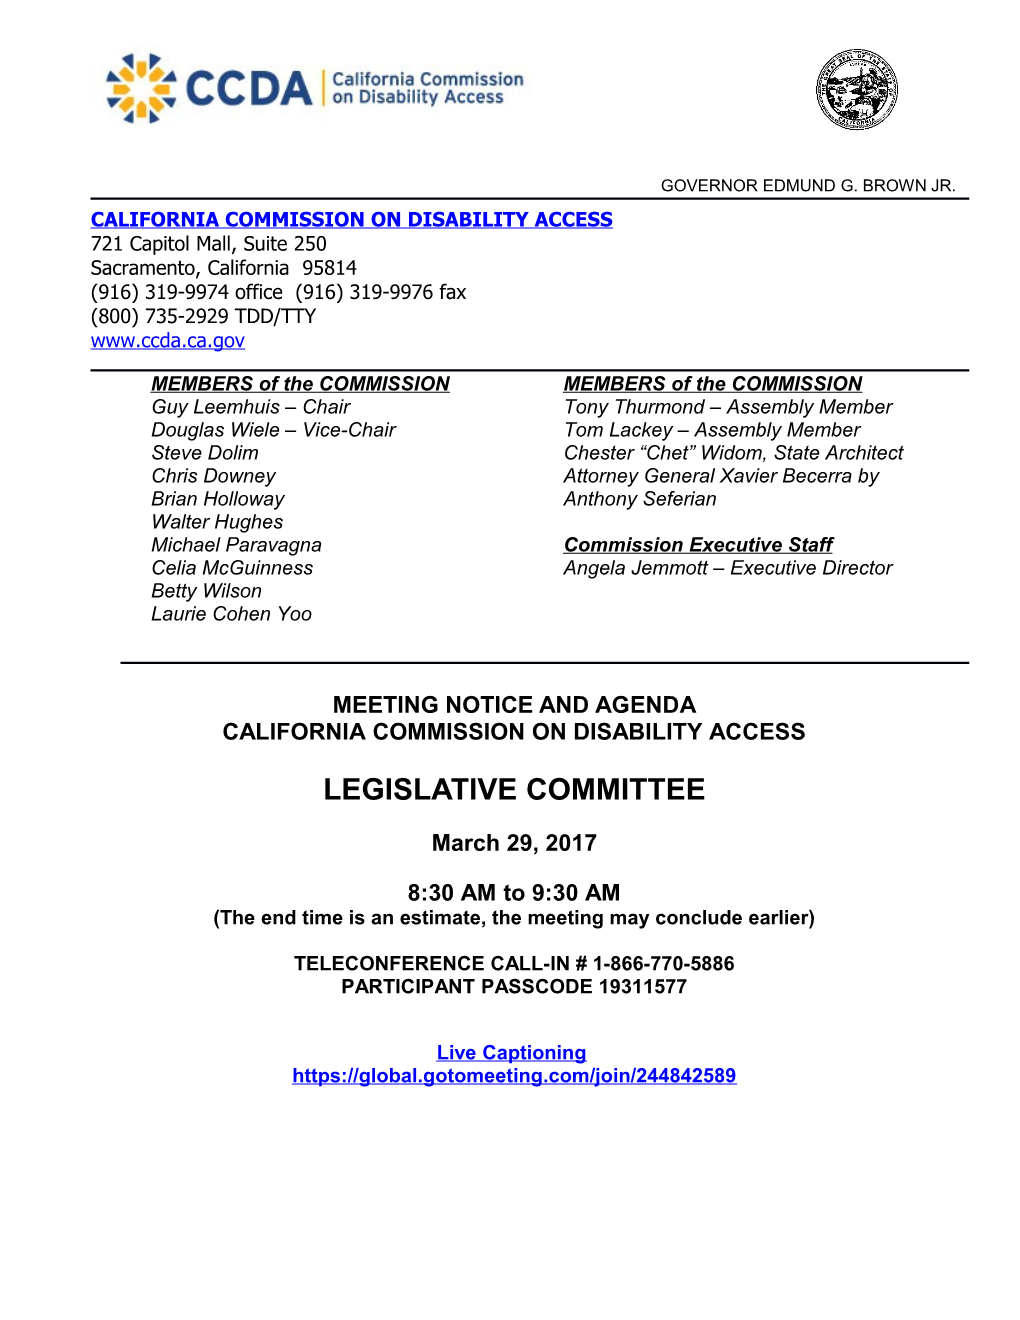 California Commission on Disability Access